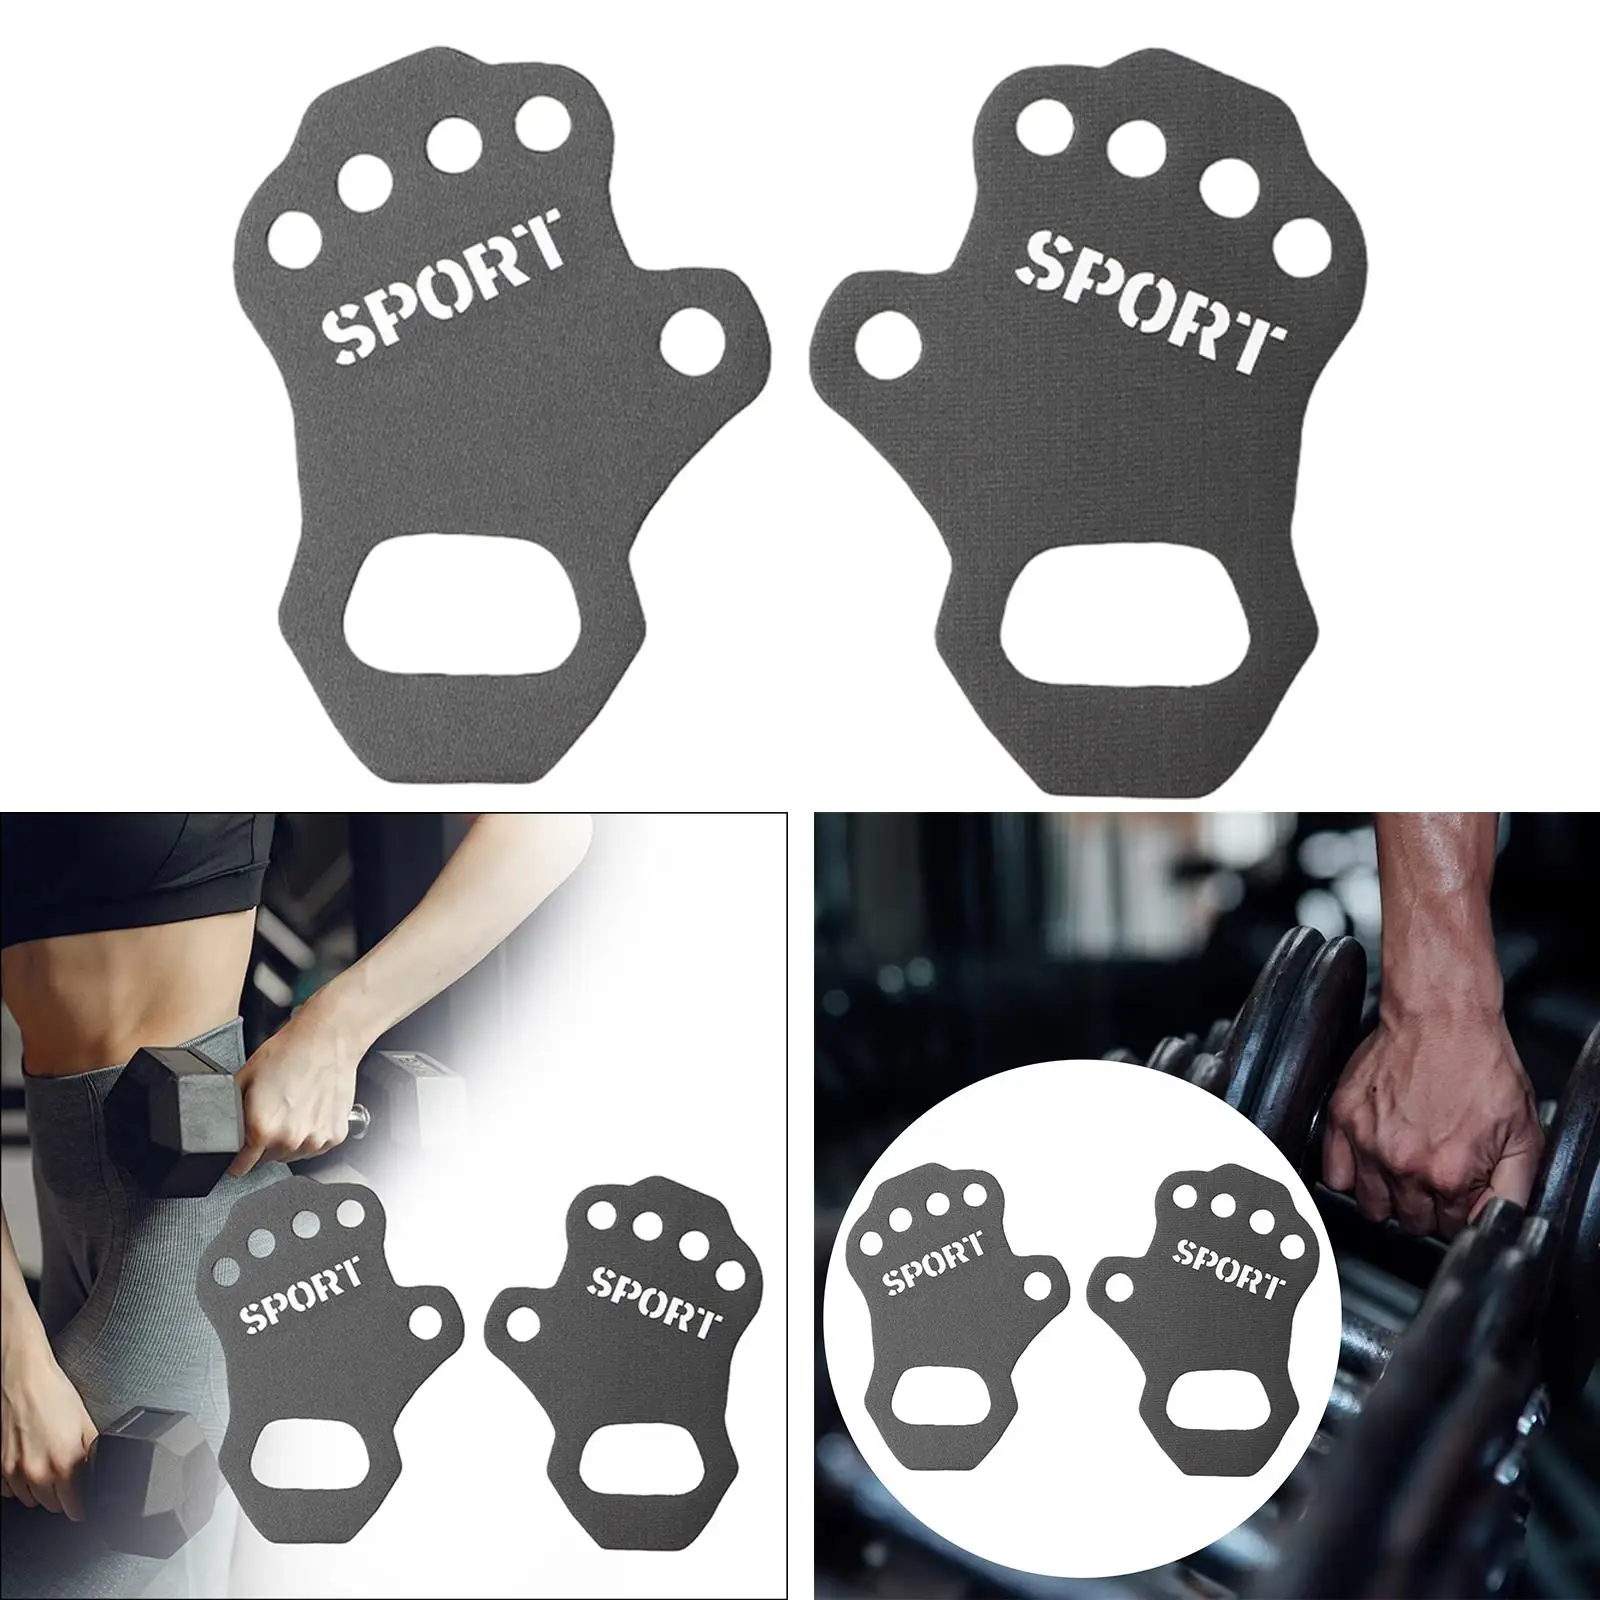 Workout Gym Gloves Hand Grips Durable Rowing Gloves Wear Resistance Palm Protection Weight Lifting Gloves for Men Women Pull Ups